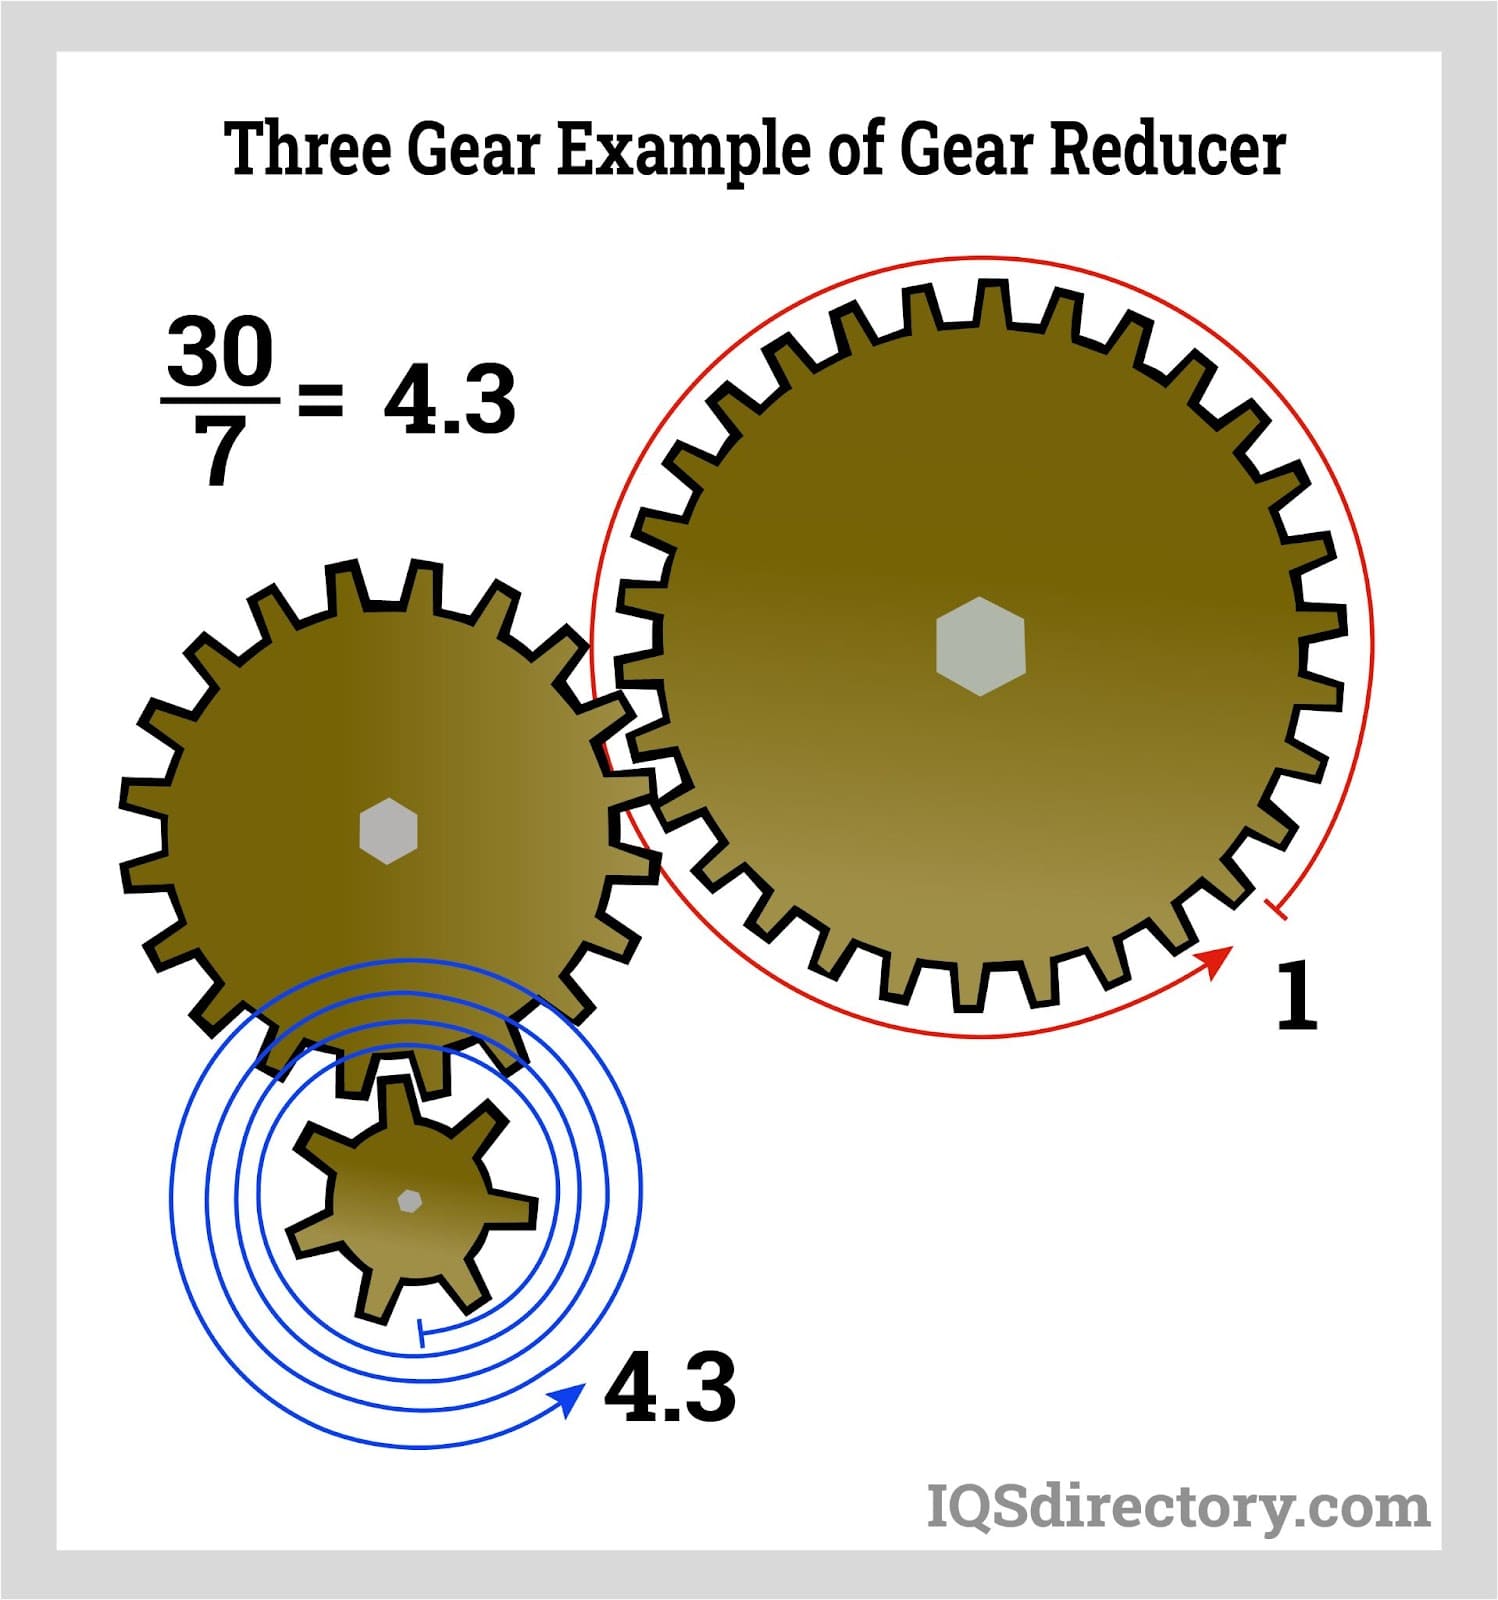 A Guide to Gears: 7 Gears, Their Traits, and How They Work